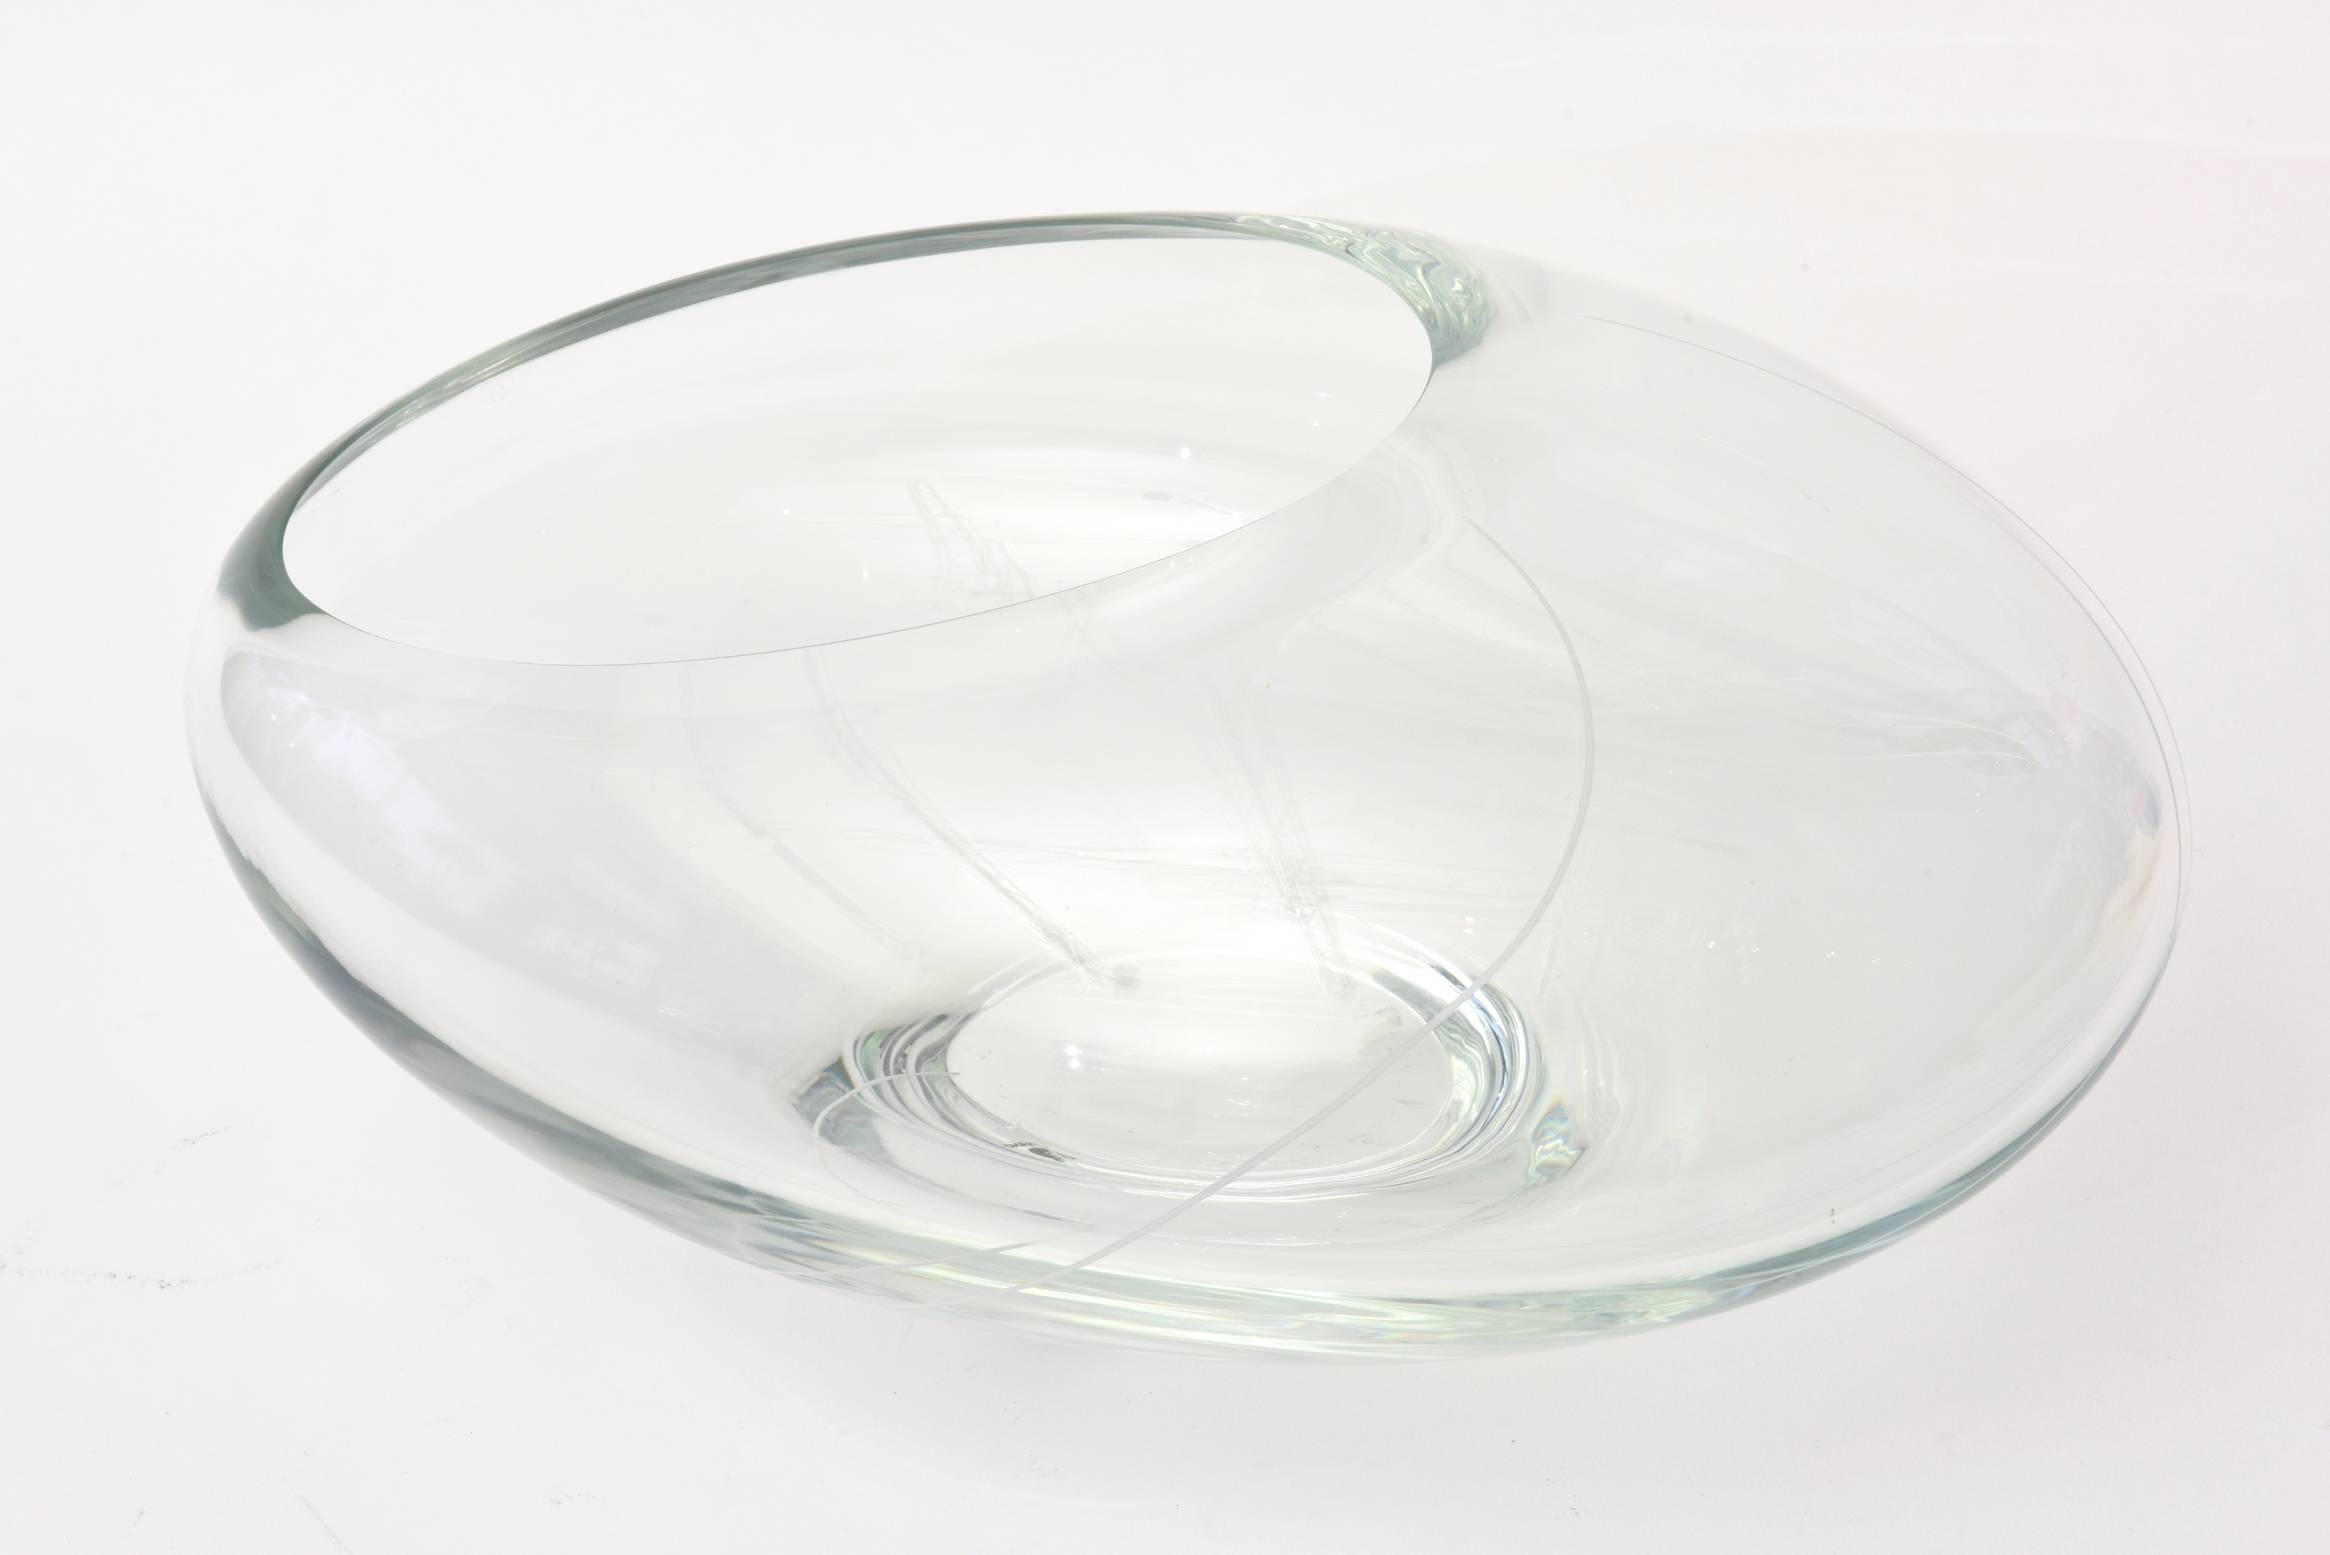 This stunning Italian Murano glass clear sculptural bowl / vase and or centerpiece by Seguso is asymmetrical. It has a plastic Murano Seguso label on it and is from the 1980s. There are a few white lines in a squiggly design on the clear glass. It